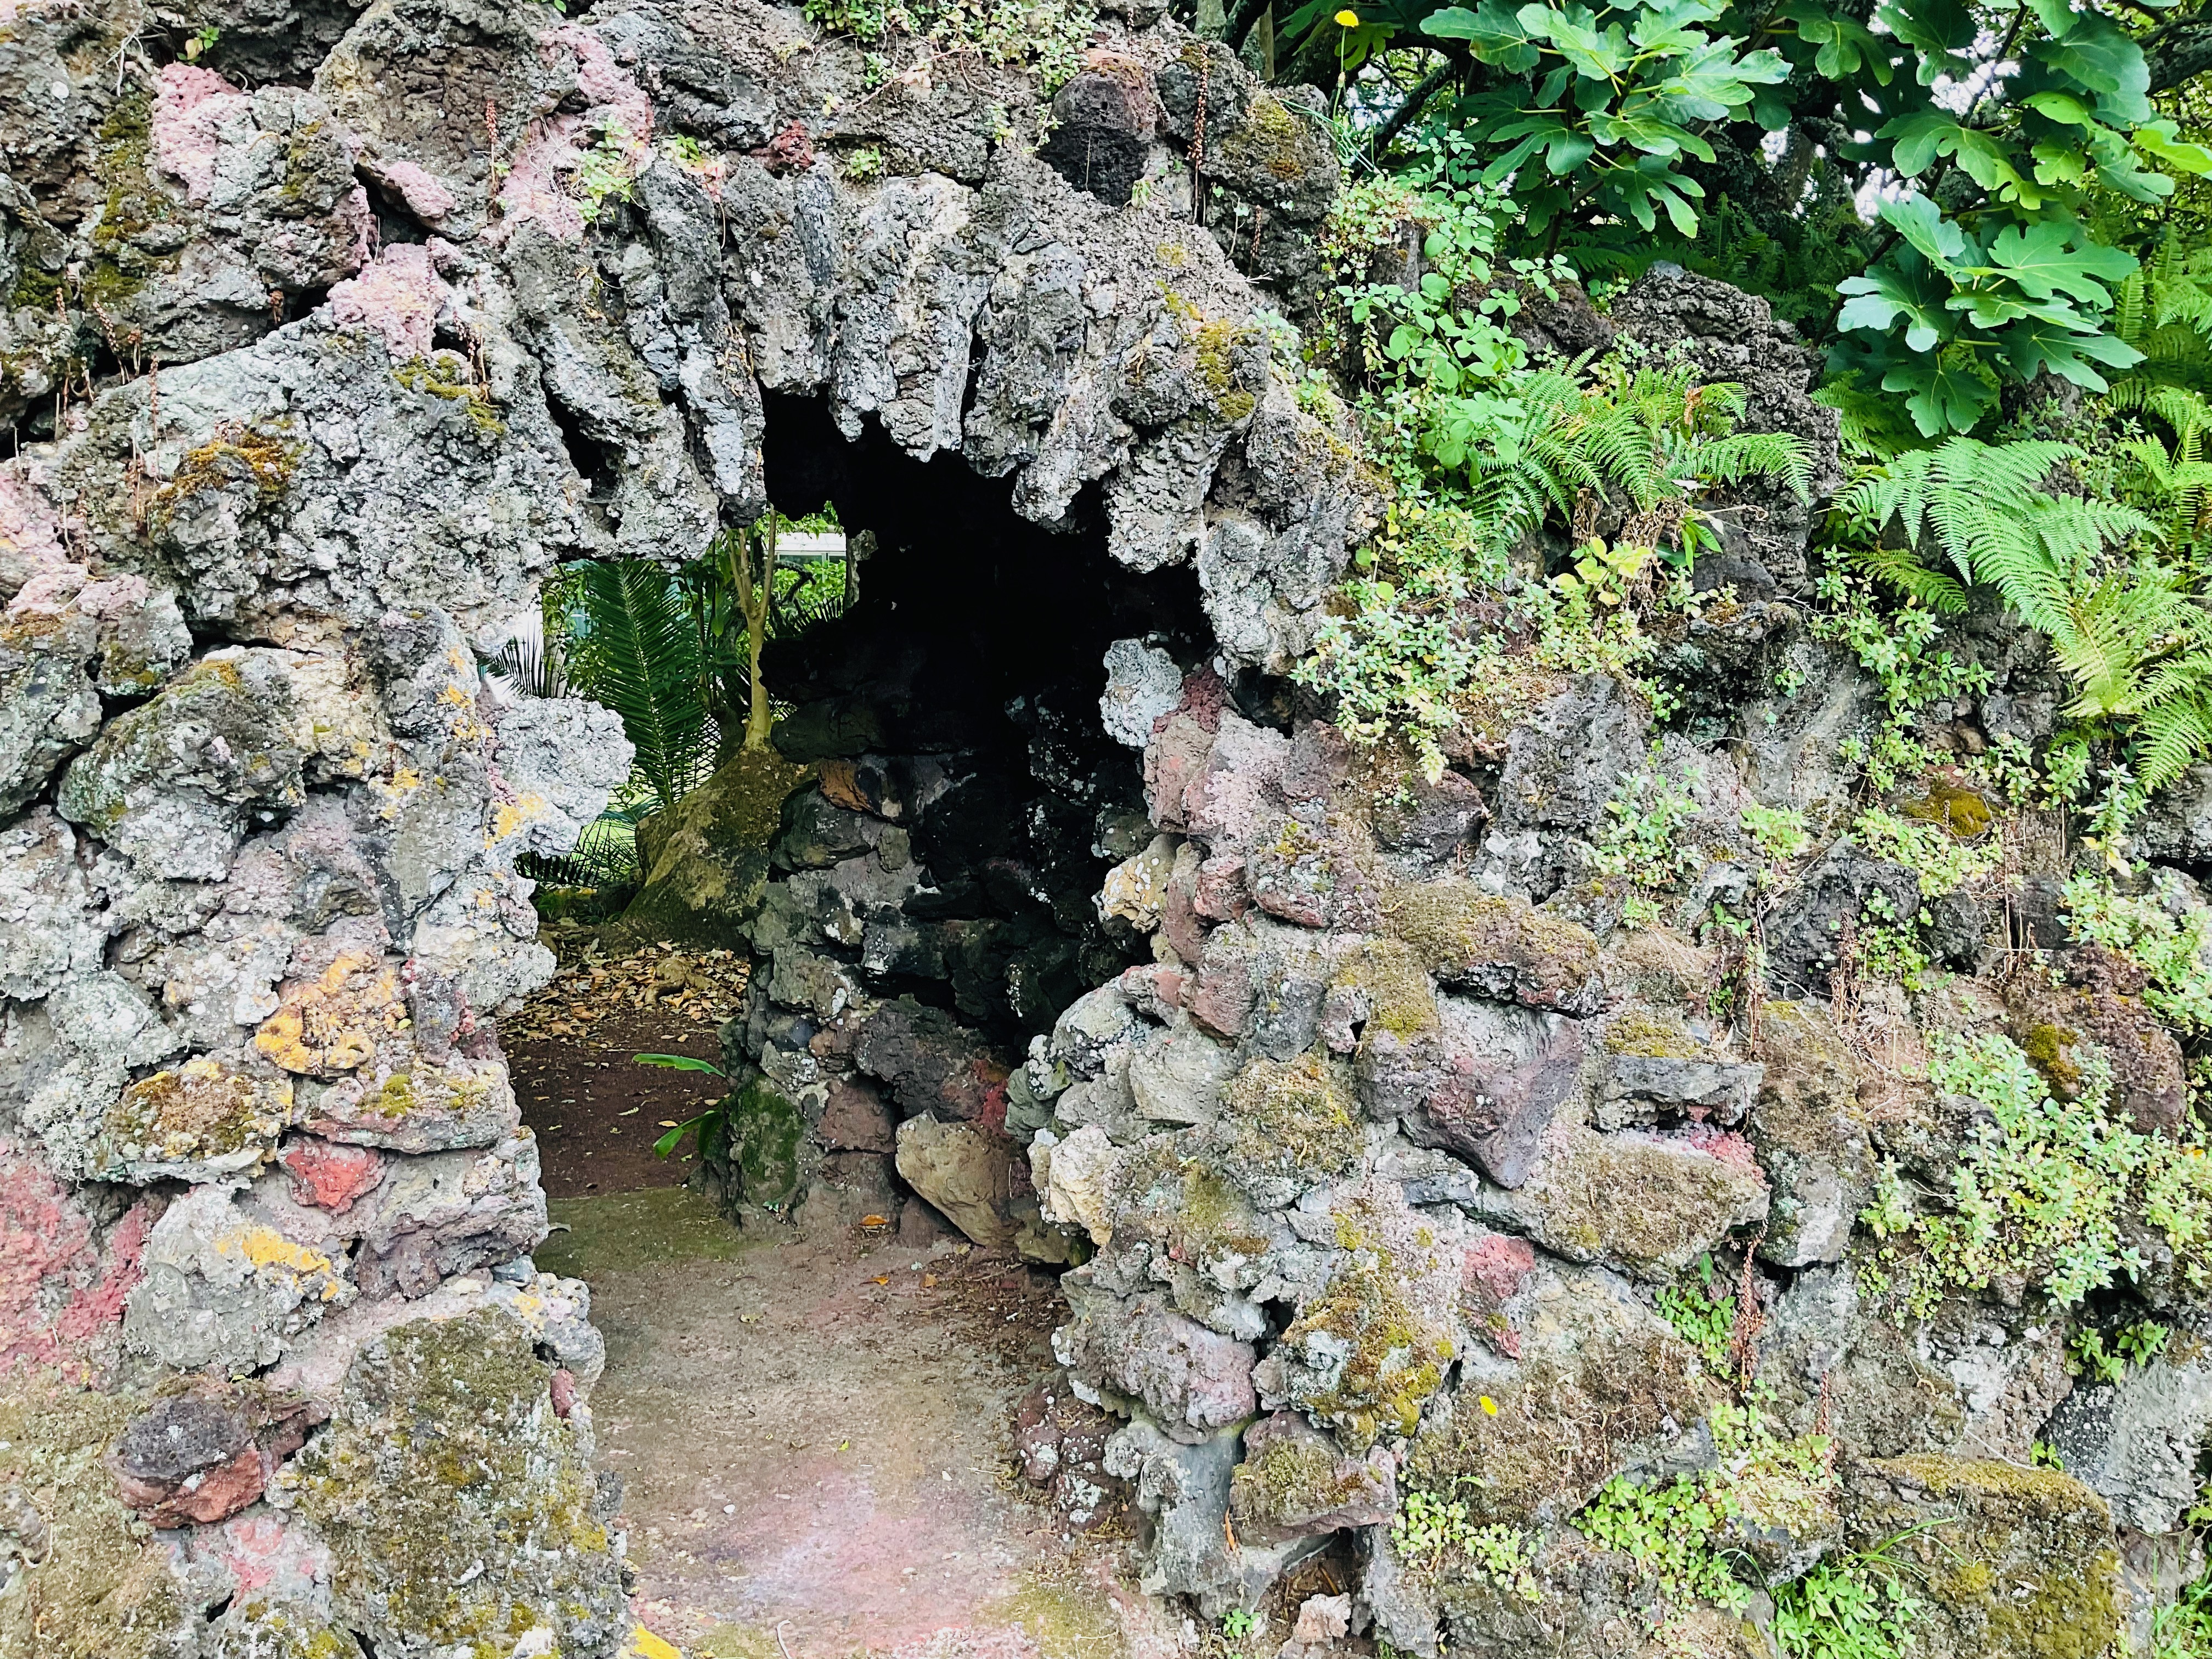 An arch made of volcanic rock spanning a small walkway, with ferns, moss, and other plants sprouting from the rocks.